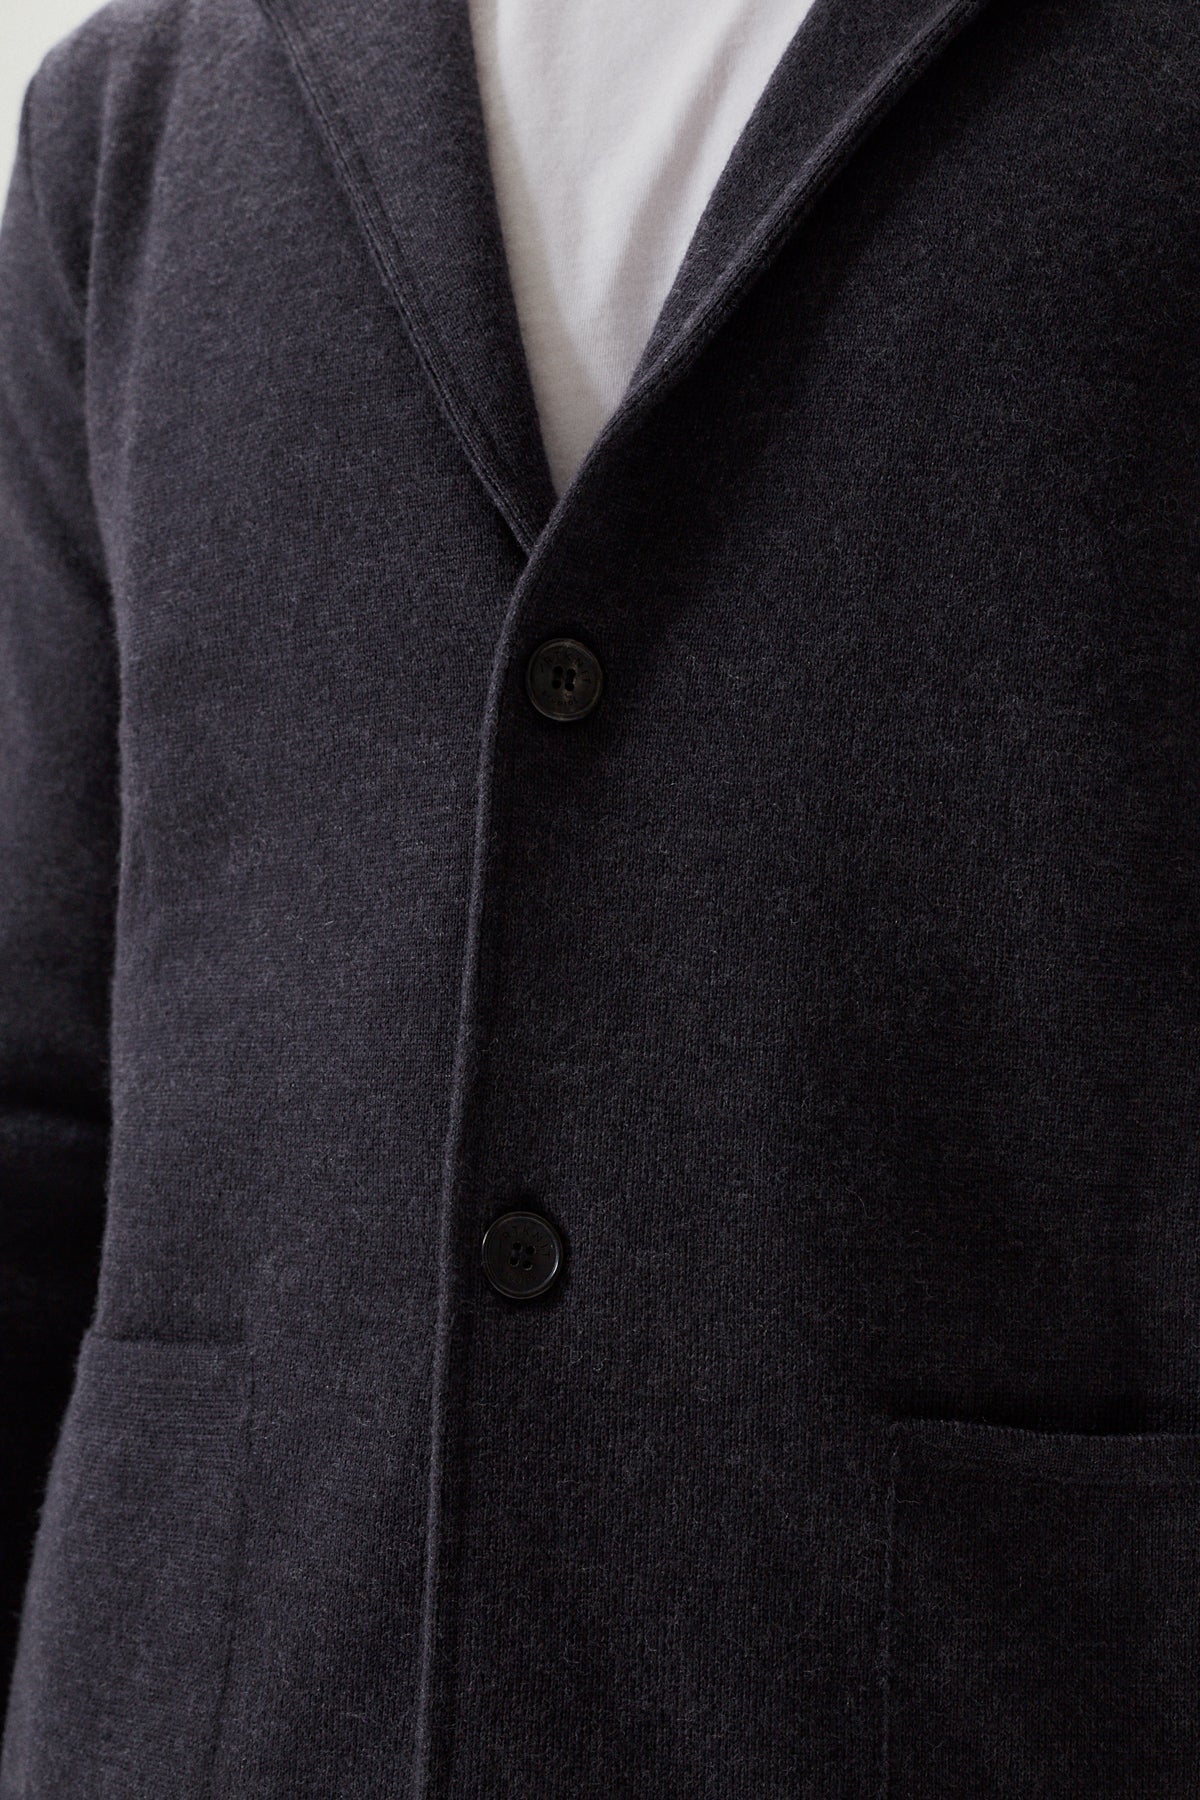 the boiled wool blazer imperfect version anthracite grey